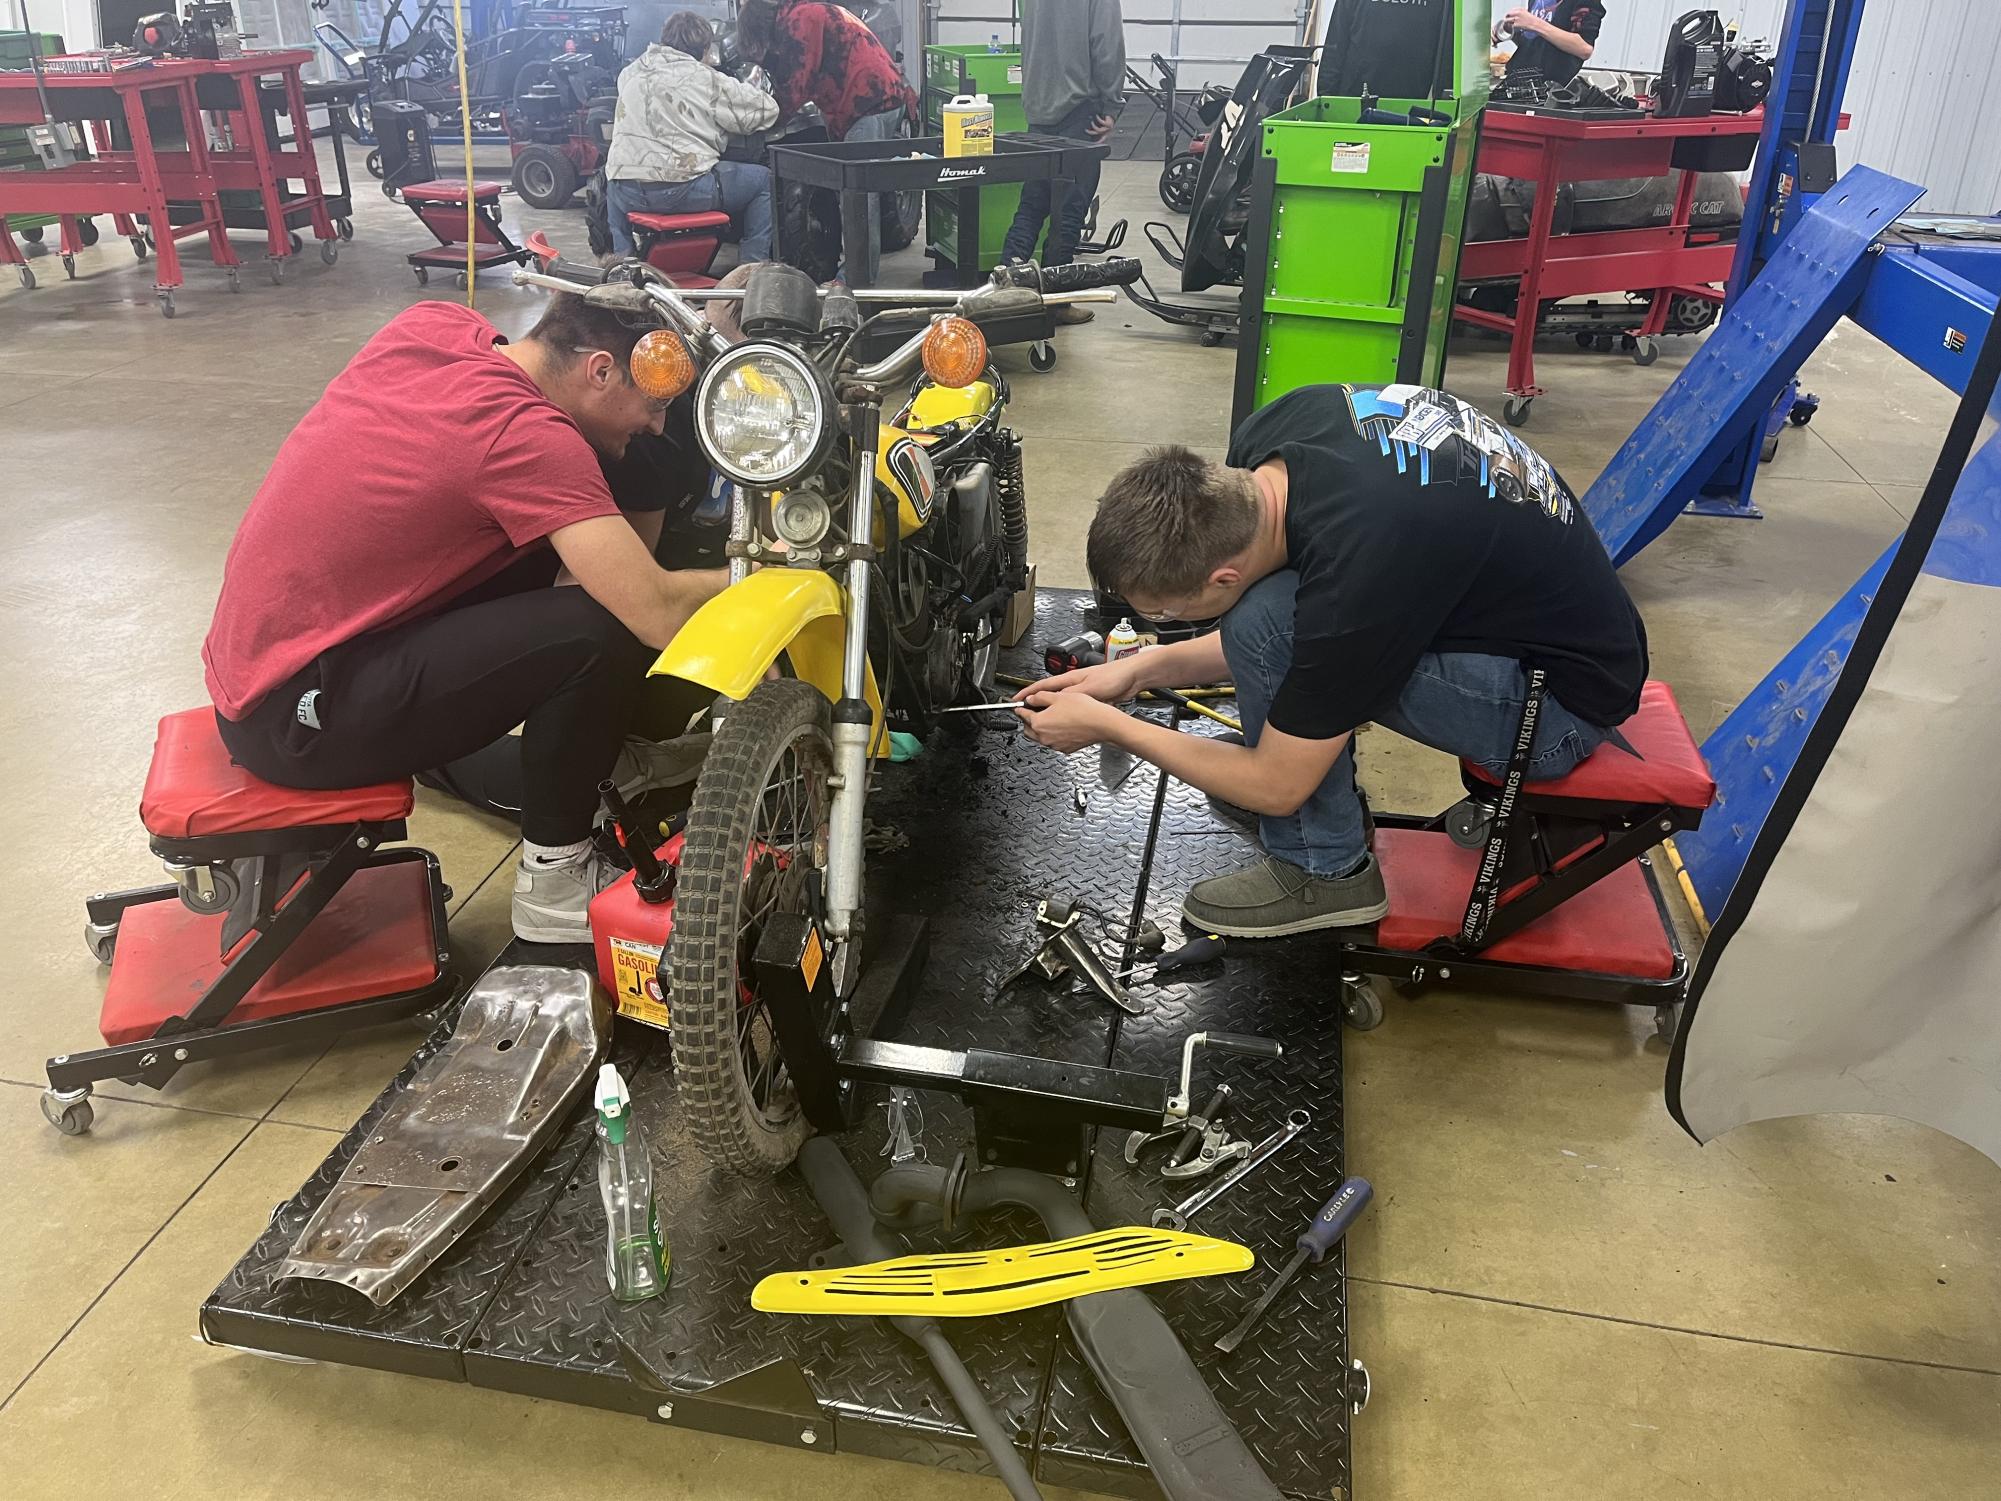 Brody Griebel, Ethan Goff, and Michael Powers (left to right) work to get the bike running a second time.